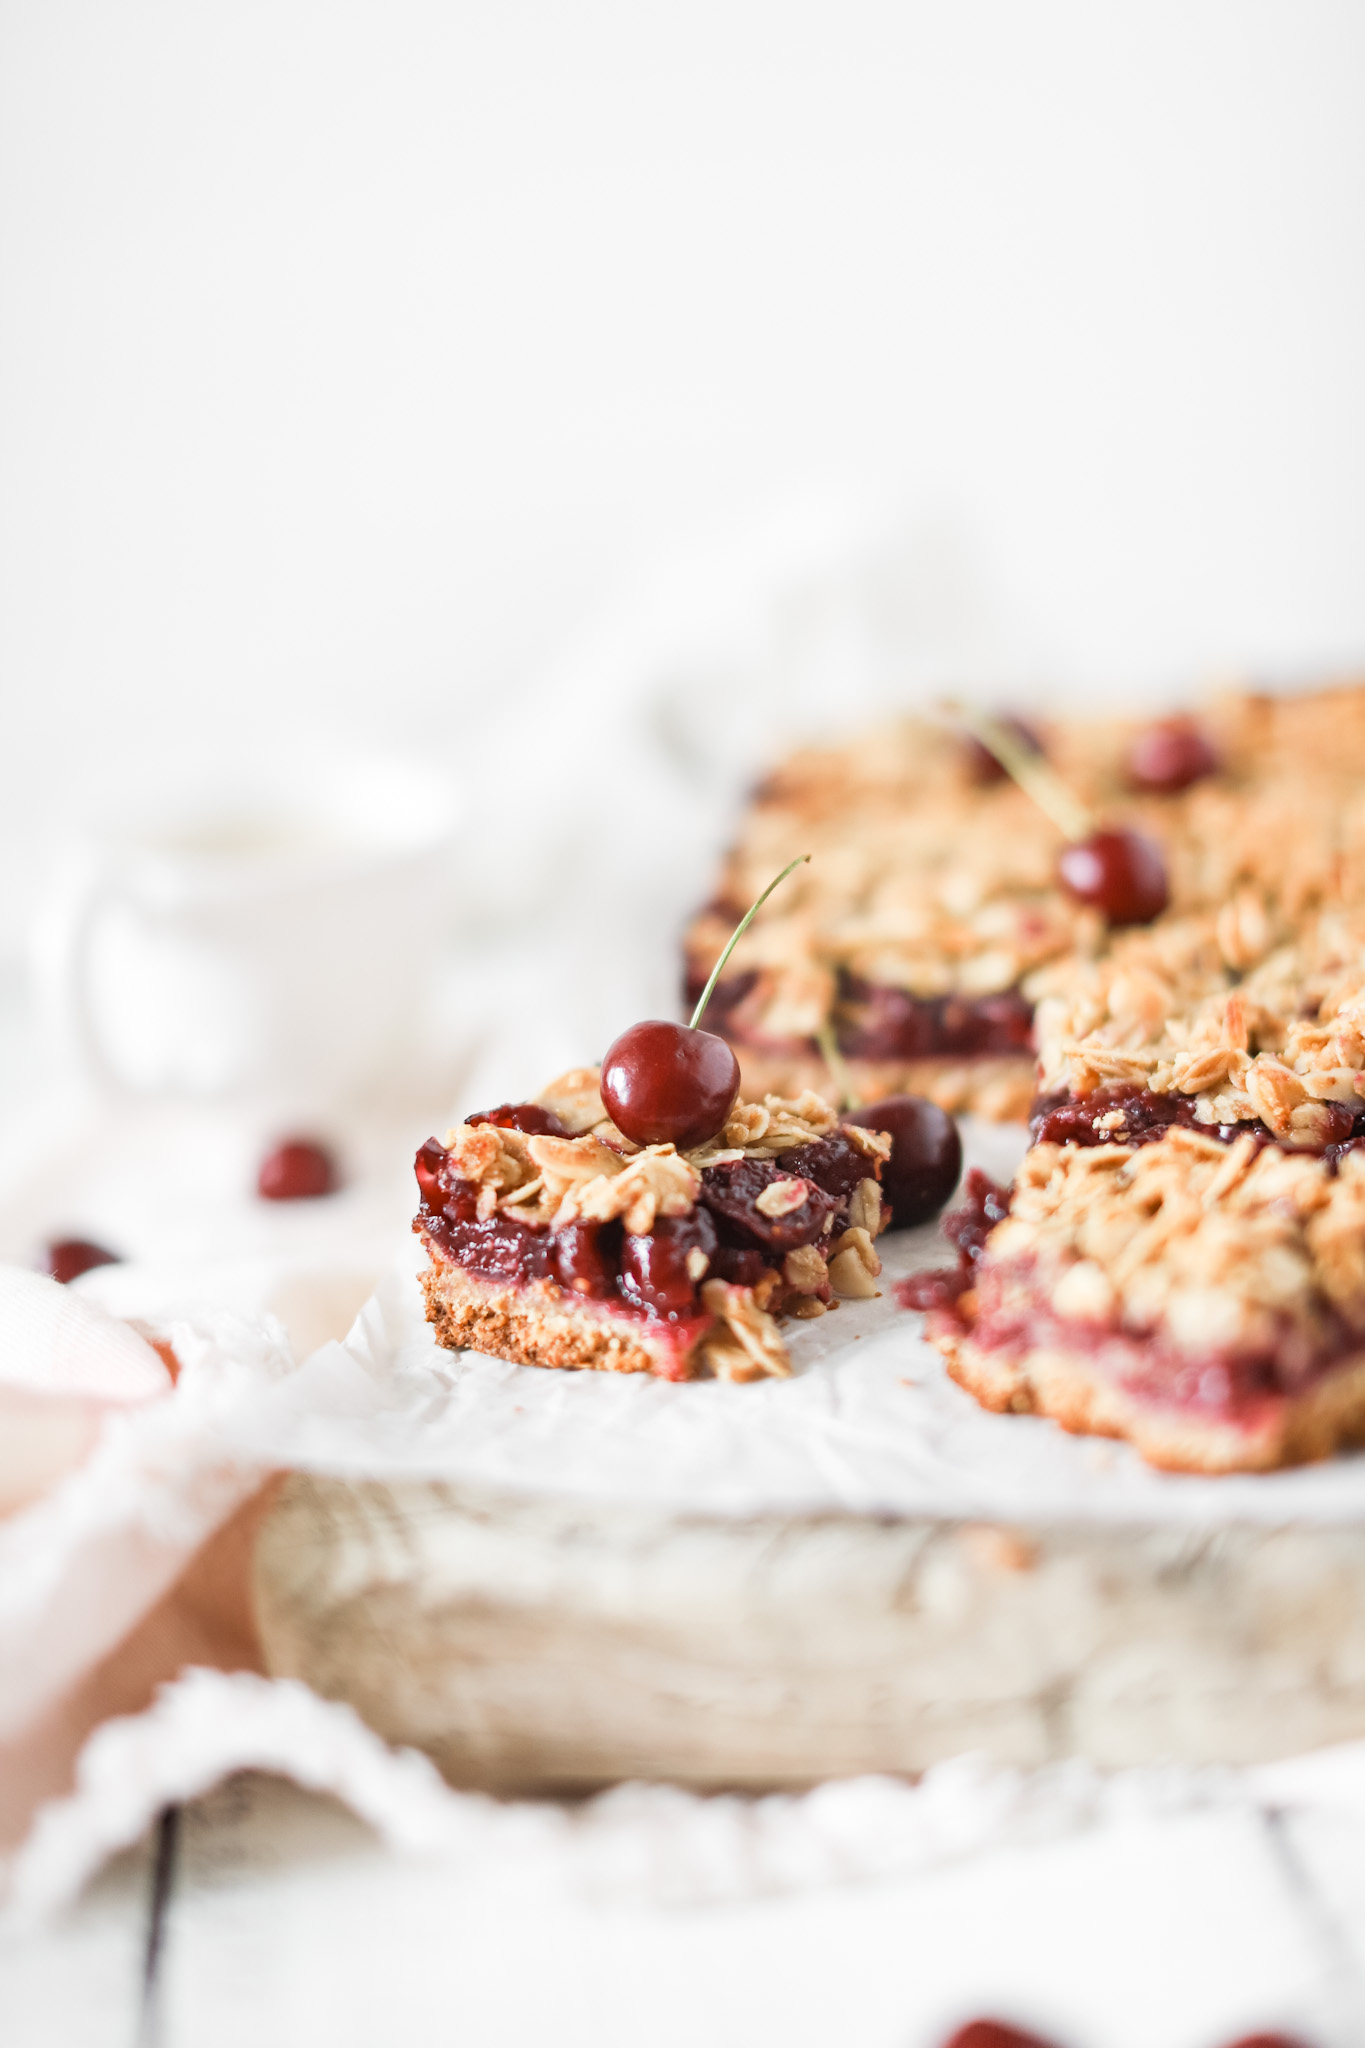 Okanagan Cherry Oat Bars cut into squares with a cherry on top